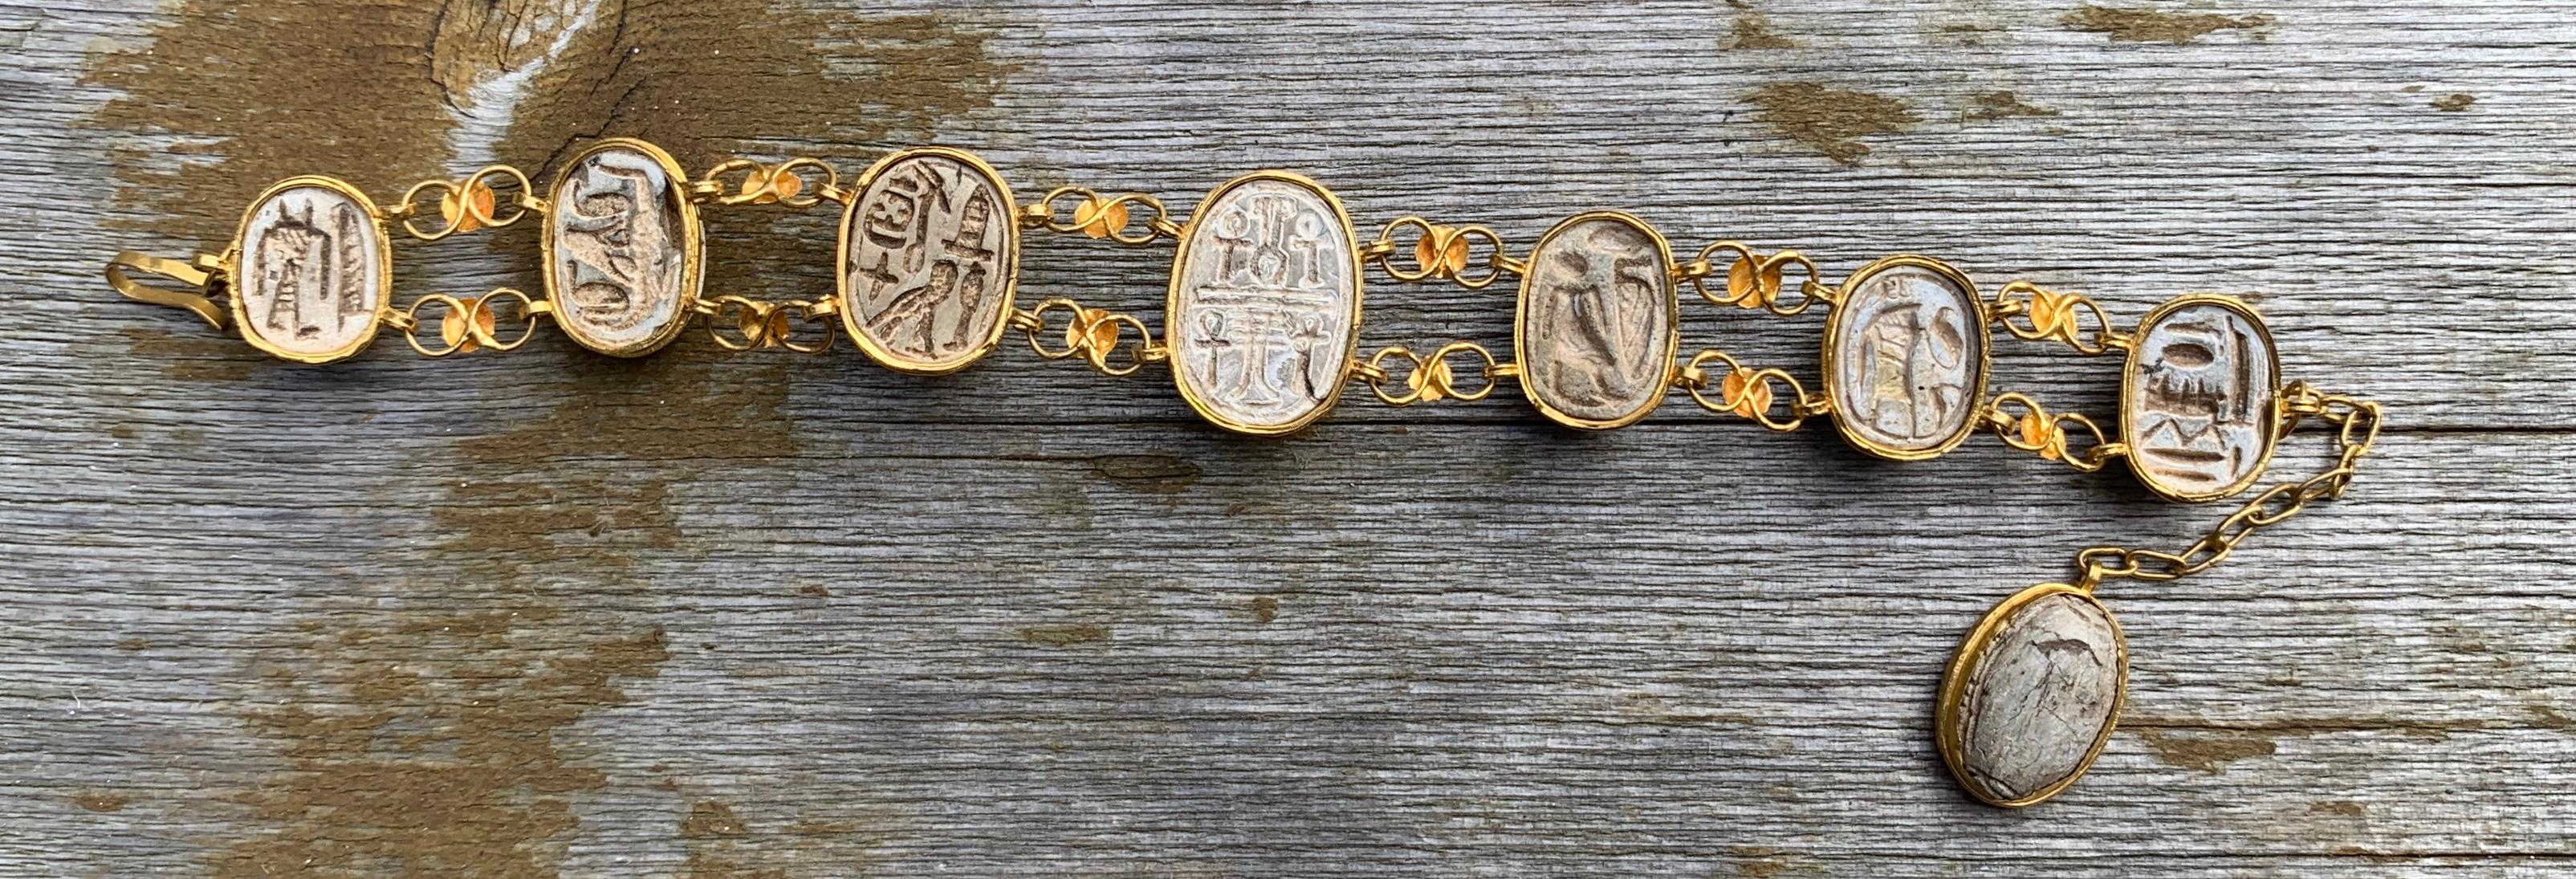 This is a very rare and wonderful antique Egyptian Revival Bracelet with eight graduated Scarab Beetles set in 20 Karat Yellow Gold with Hieroglyphics on the reverse of the Scarabs. The gorgeous scarabs are hand carved Sandstone. The scarabs are